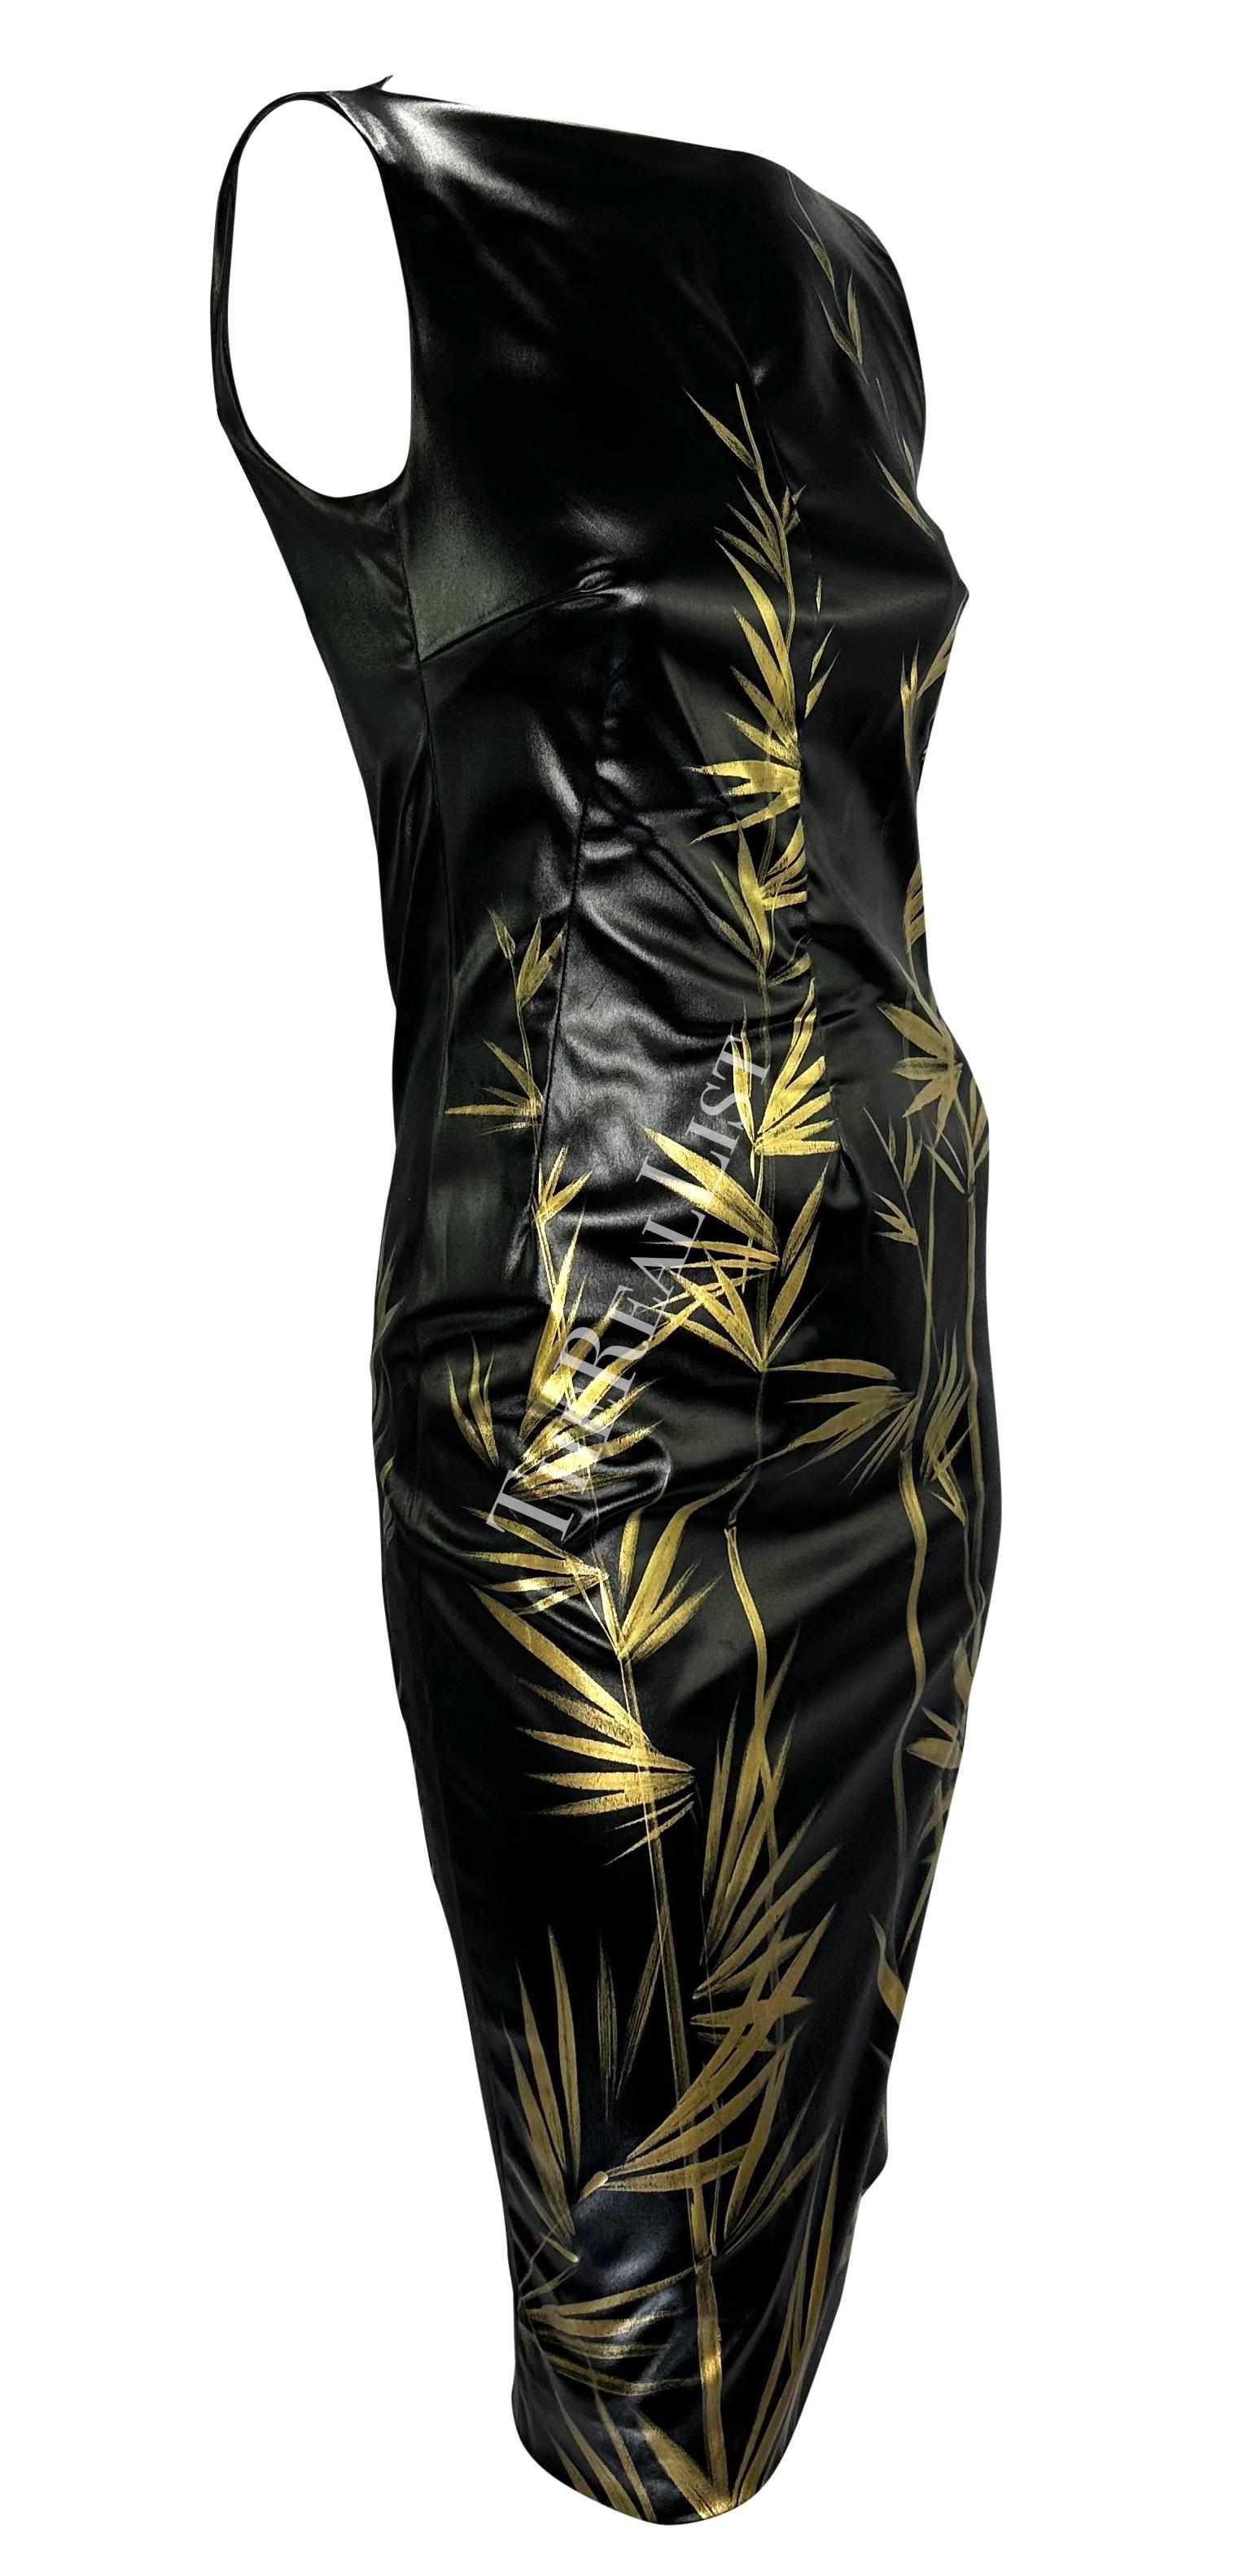 F/W 1999 Dolce & Gabbana Black 'Wet Look' Hand-Painted Gold Bamboo Bodycon Dress For Sale 2